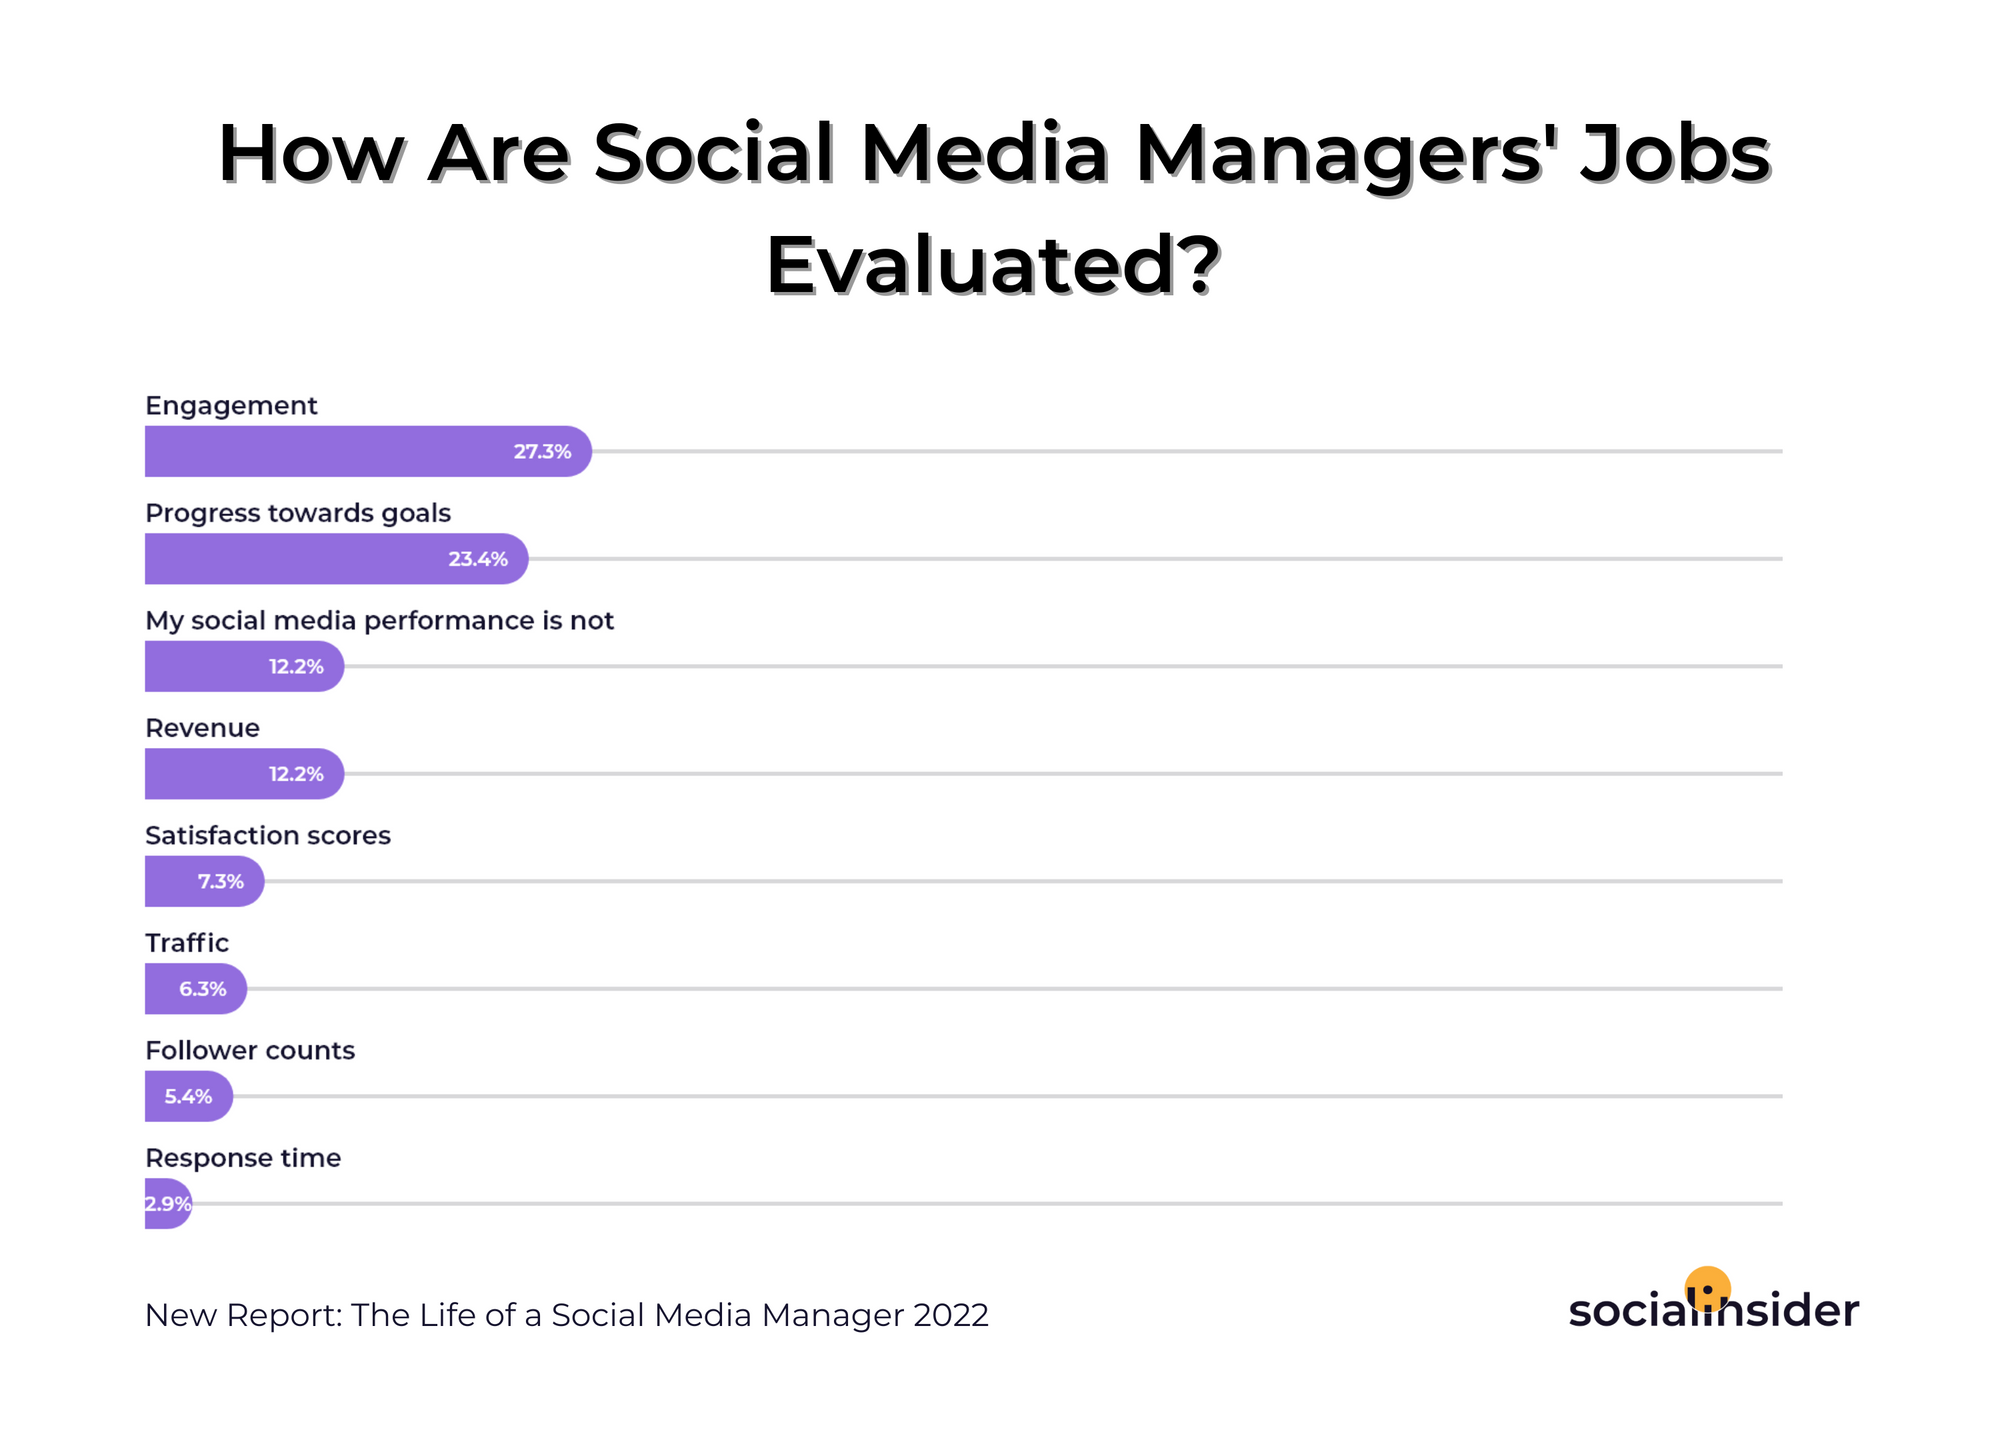 This is a graph depicting how social media managers jobs are evaluated